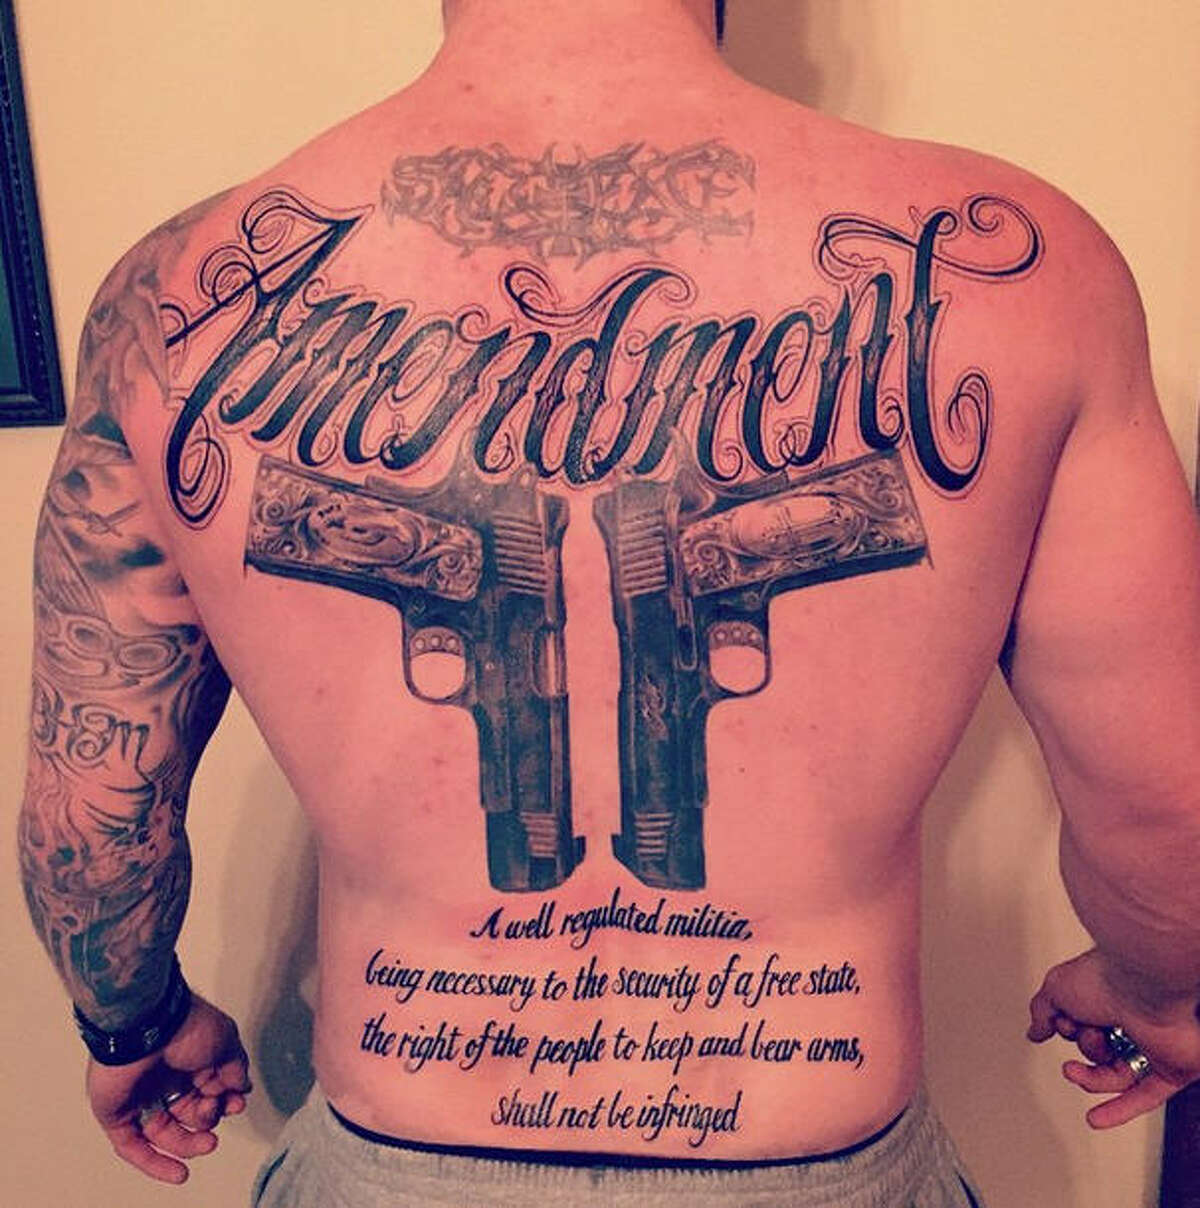 Ol Bailey Pots  Pans on Twitter I sent this to my friend when he  mentioned the idea of getting the second amendment tattooed on his forearm  Well today he actually got